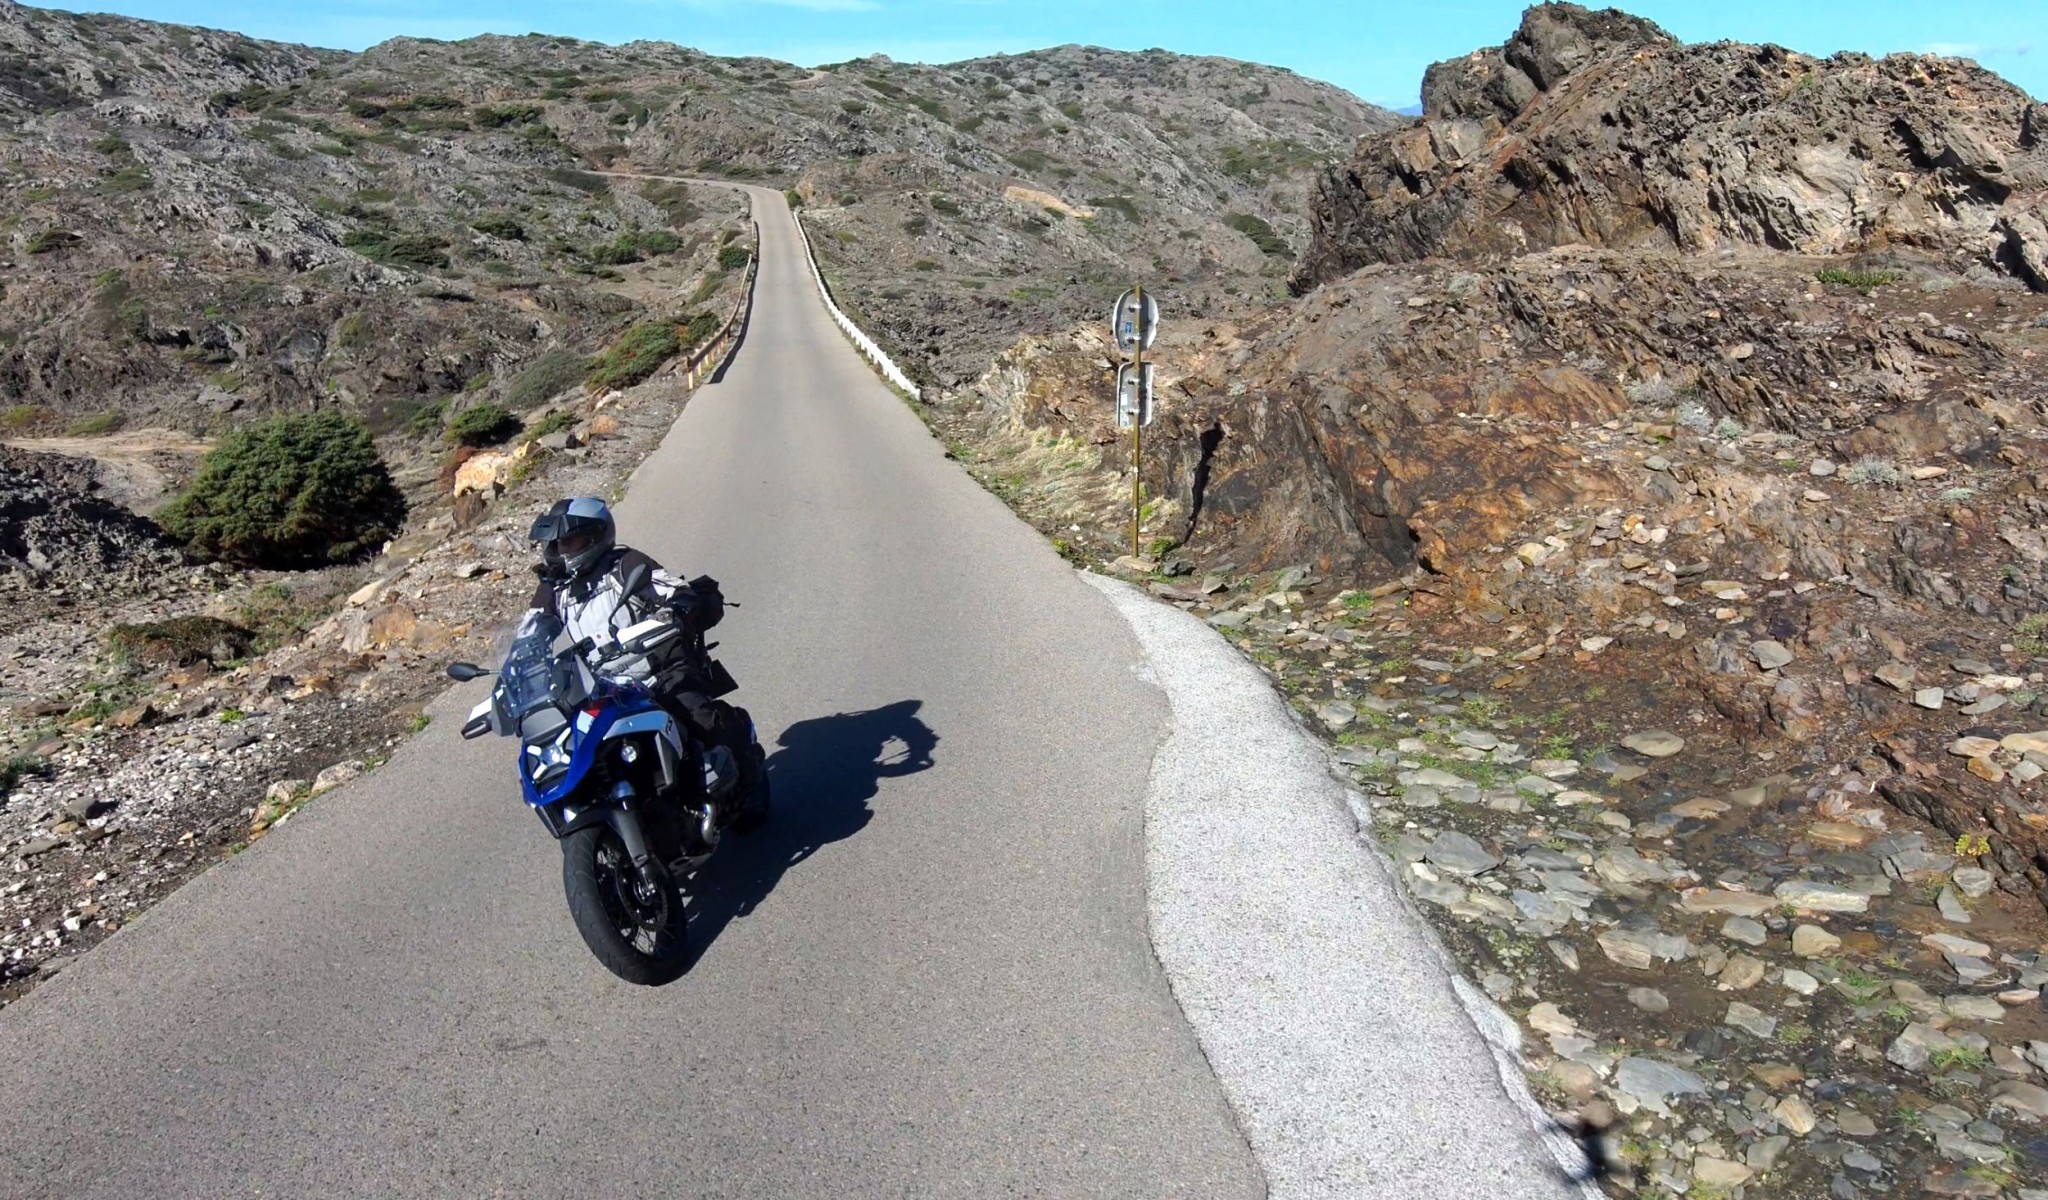 BMW R 1300 GS road test - from Barcelona to Vienna - Image 15